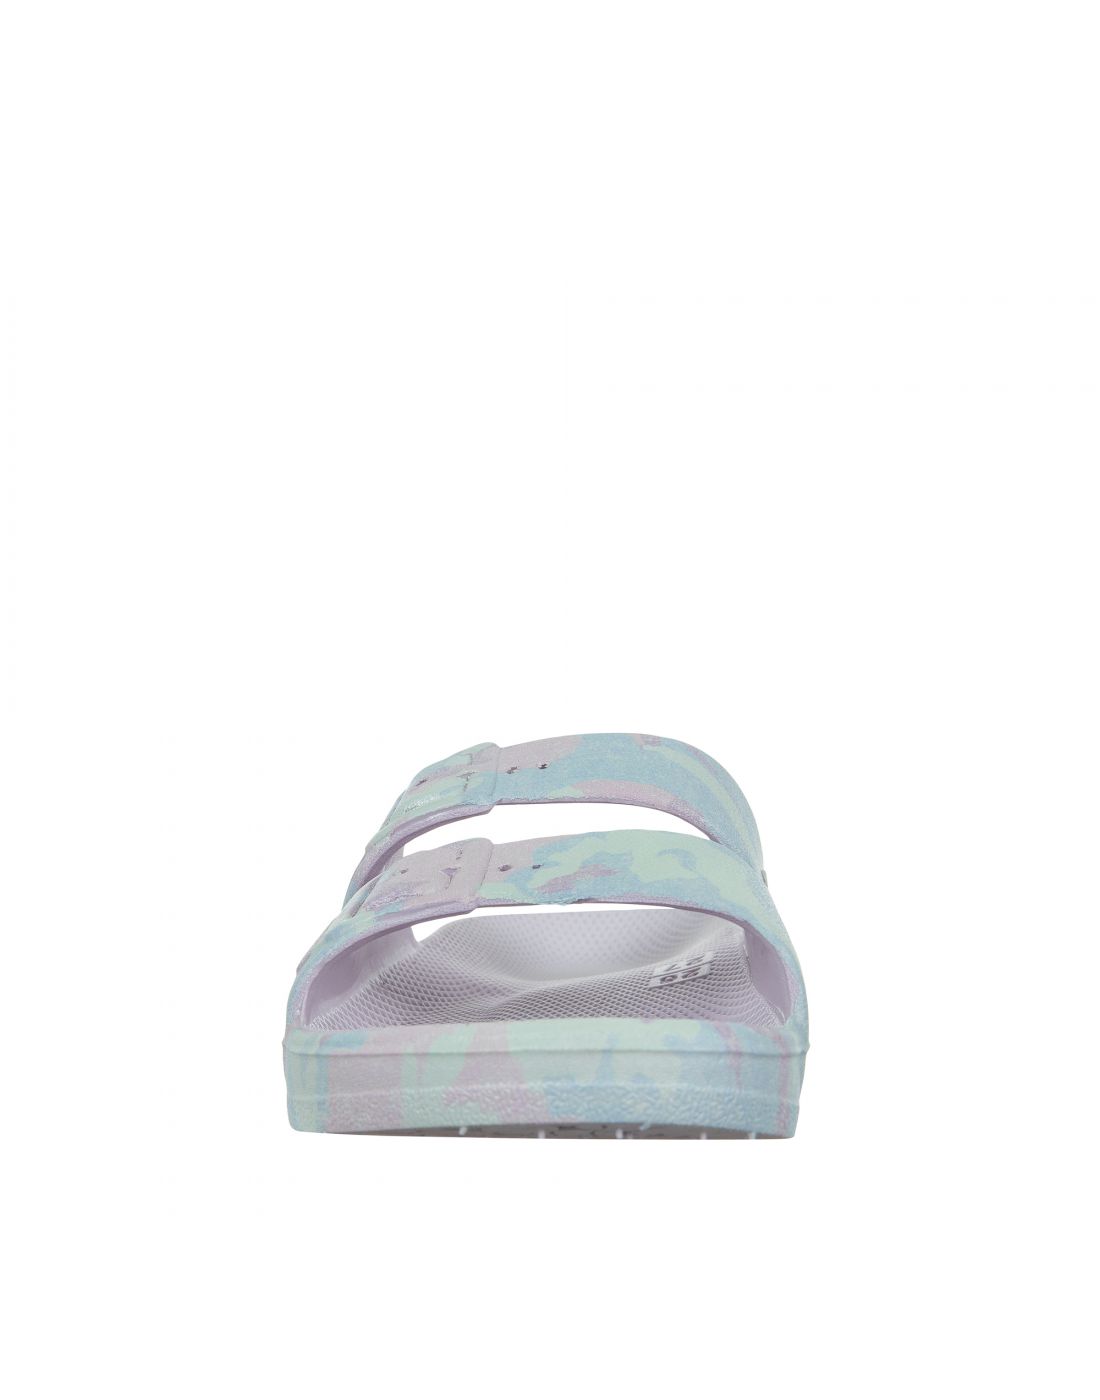 Freedom Moses Shoes Girls Flip-Flops